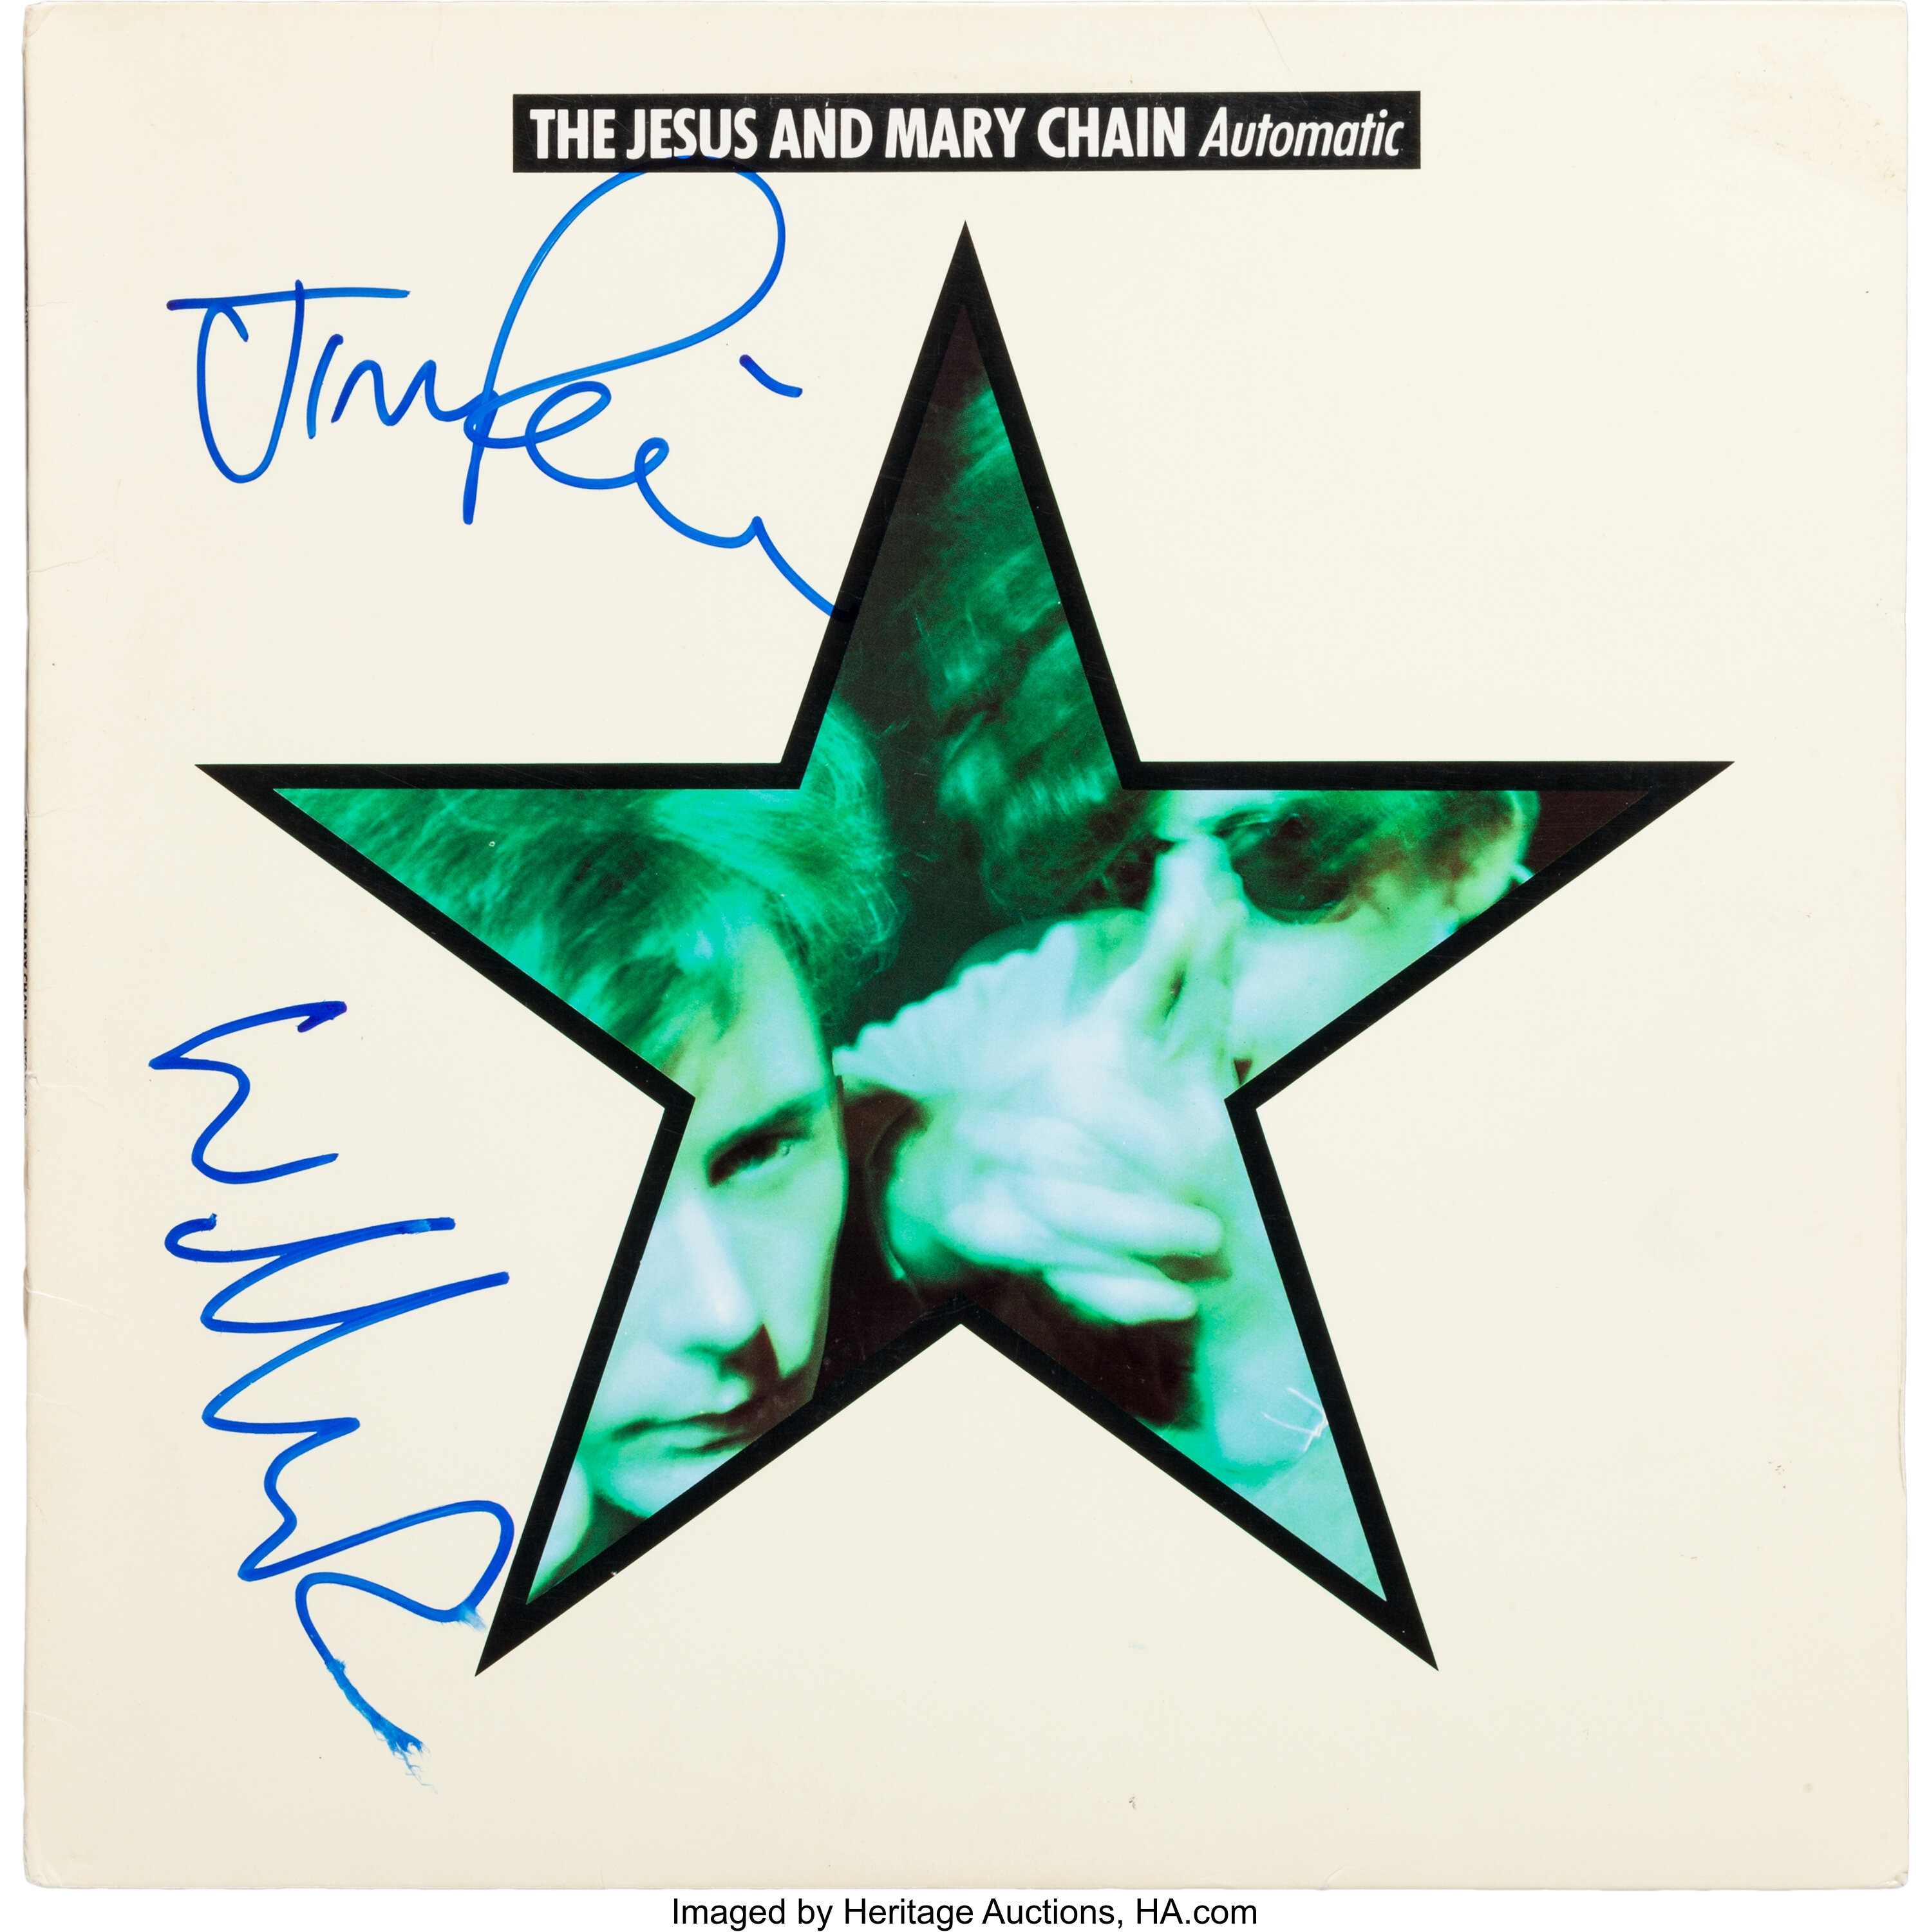 The Jesus and Mary Chain Signed Automatic Album Cover (1989 